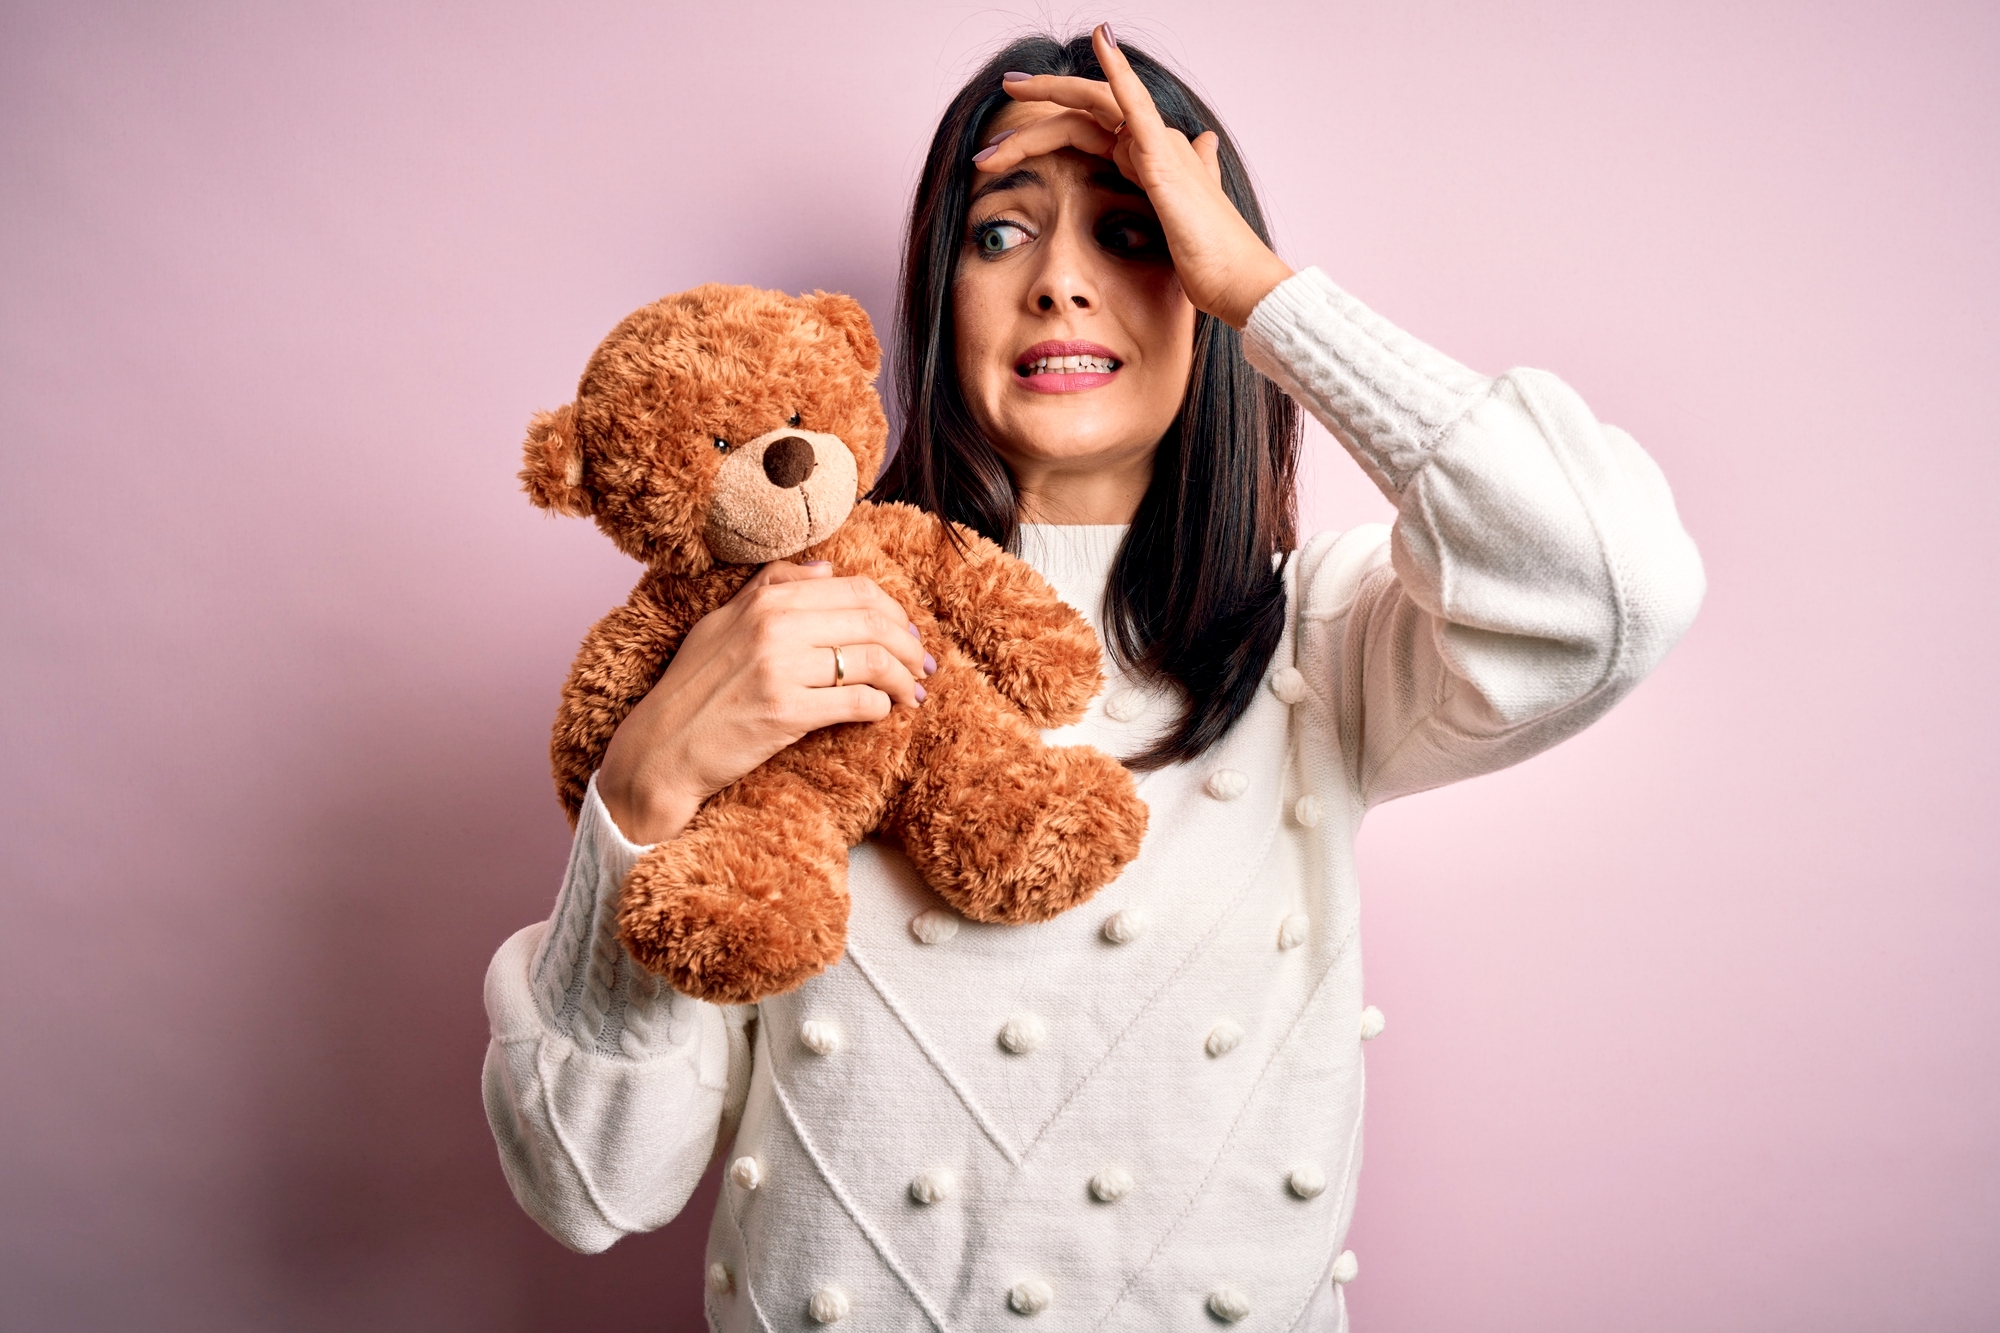 A woman with dark hair in a white sweater nervously holds a brown teddy bear. Her left hand is on her forehead, and her face shows an expression of worry or concern. She stands against a pink background.